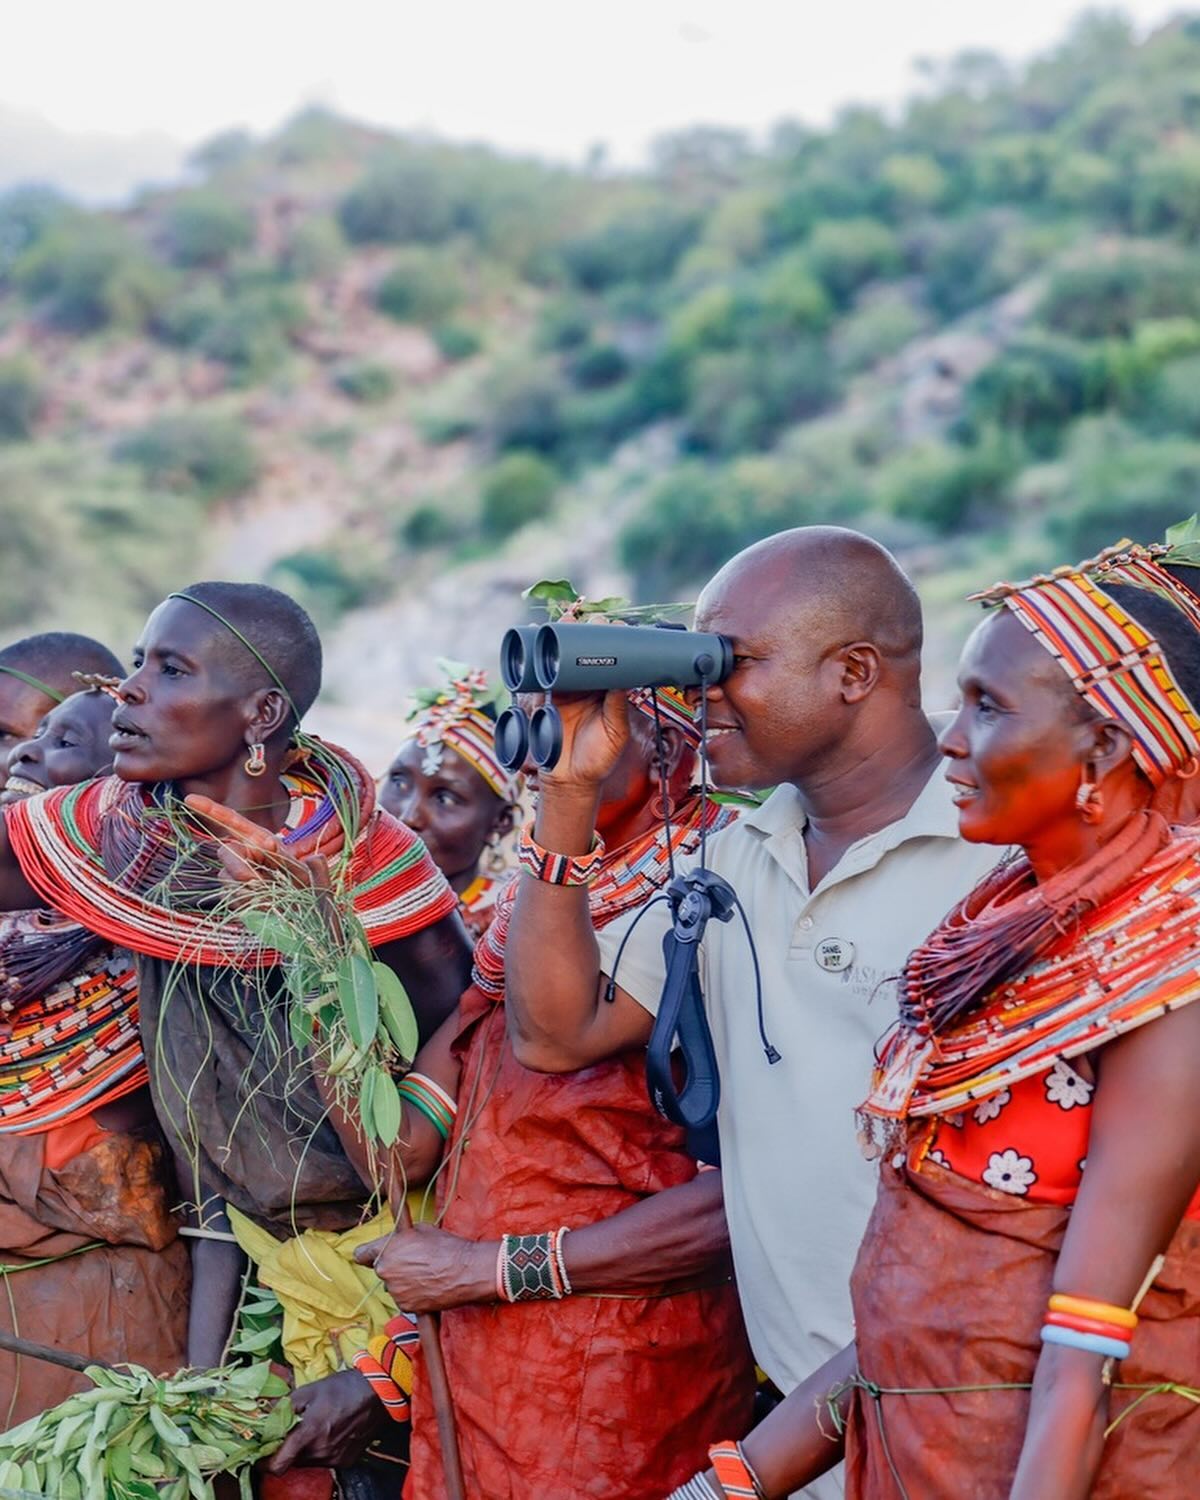 Experience the African wilderness like never before with our new Swarovski EL 12 x 50 binoculars 🔎

Be captivated by the wildness of the Samburu region at Sasaab, spotting majestic elephant herds and elusive leopards. Marvel at the big cats’ graceful movements over the Masai Mara’s sweeping landscapes at Sala’s Camp. At Solio Lodge, get up close and personal with wildlife around the watering hole from the comfort of our main deck. Enhance your safari adventure with us and witness the wonders of Kenya in unmatched clarity.

📸 1- @finlaymarrian

@swarovskioptik_outdoor

#DiscoverTheSafariCollection #TheSafariCollection #WelcomeToKenya #SalasCamp #MasaiMara #Safari #OnSafari #Samburu #SamburuPeople #SamburuSpecialFive #RhinoConservation #SolioLodge #Conservation #MountKenya #GenerationNature #SwarovskiOptik